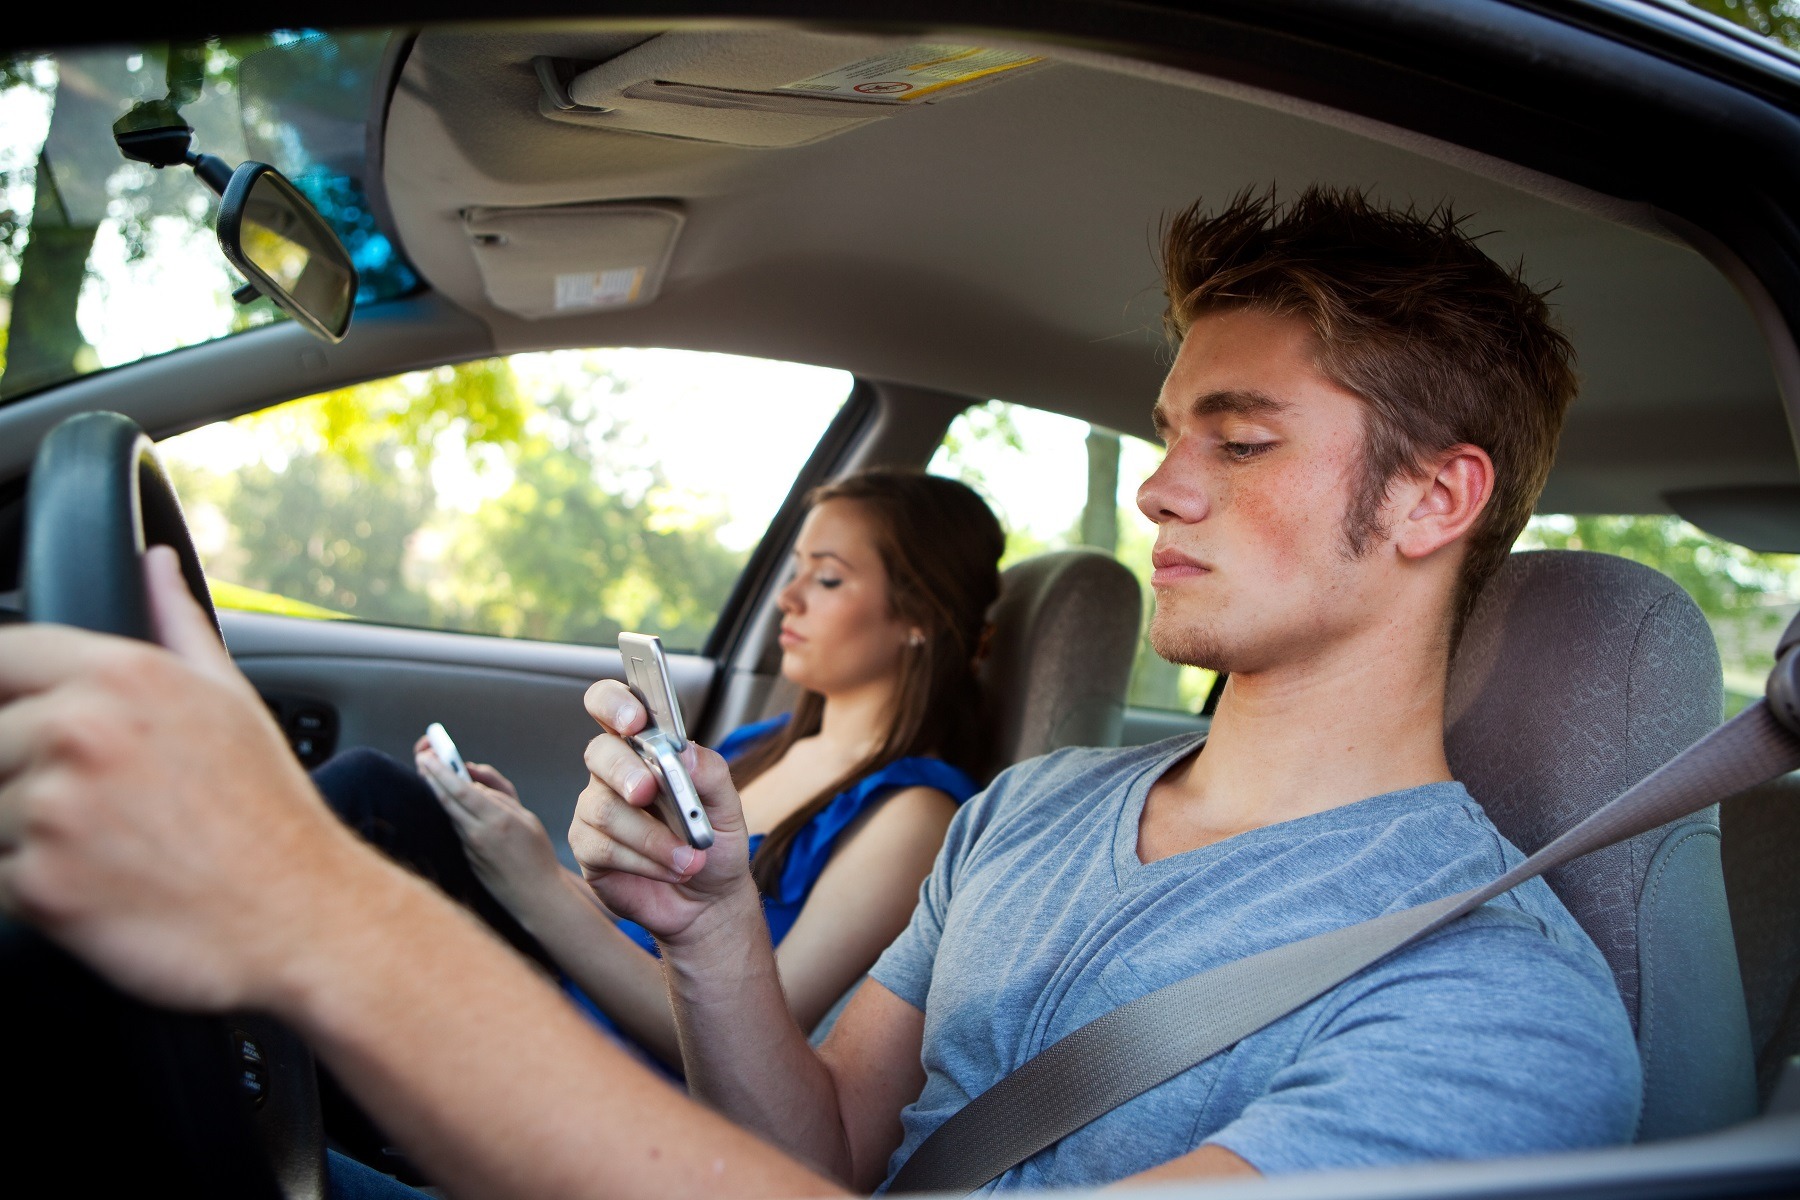 two teens driving car with texting and looking at cel phones while in motion